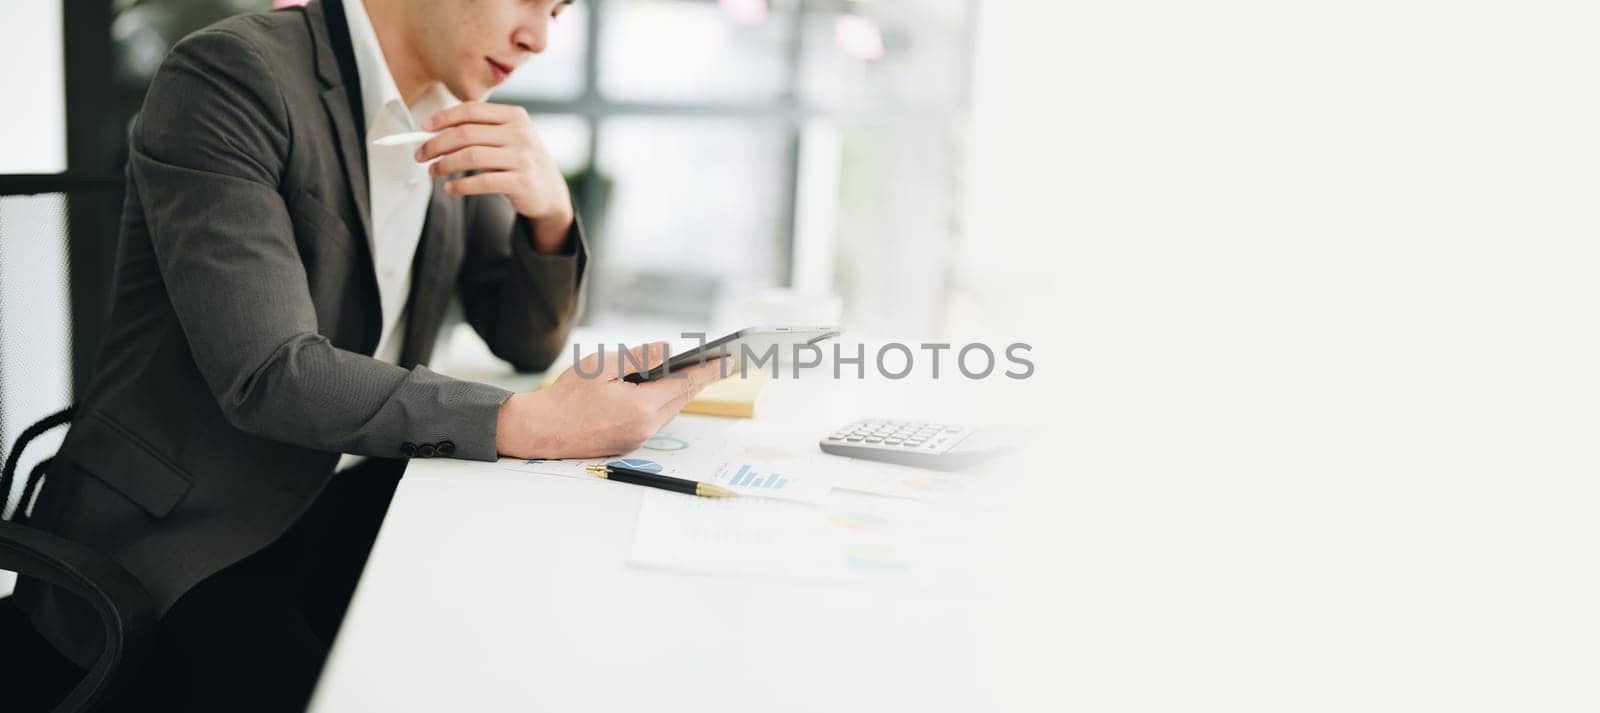 Portrait of a young Asian woman showing a smiling face as she uses his phone, computer and financial documents on her desk in the early morning hours by Manastrong